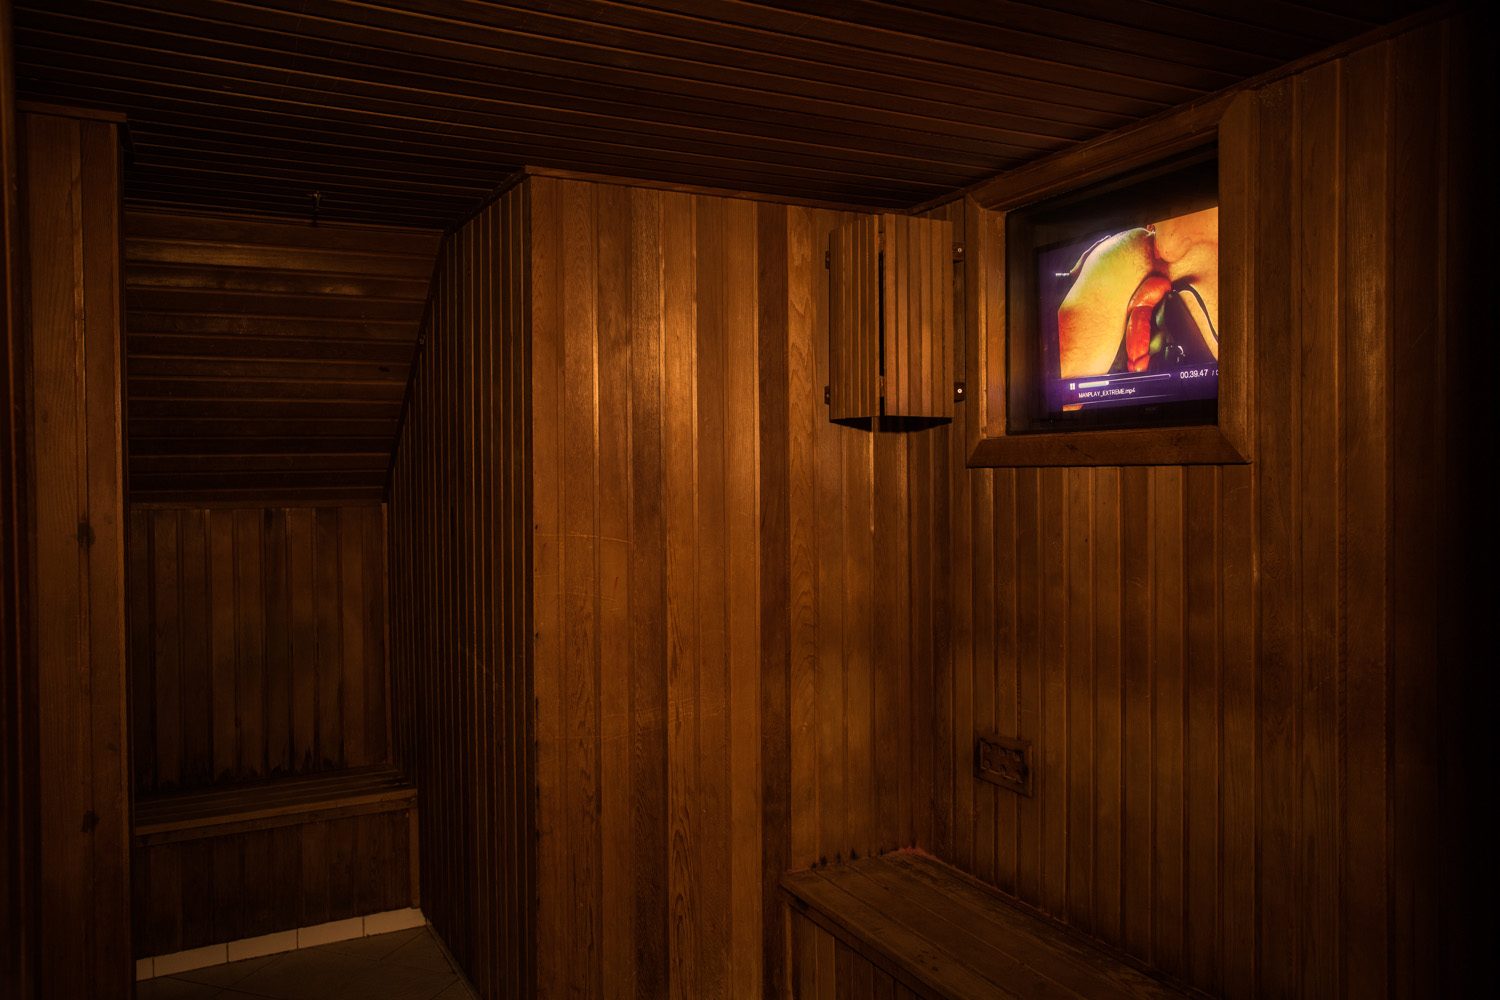 In the back of the dry sauna is a dark room. This dry sauna also features a TV playing the hottest movies.